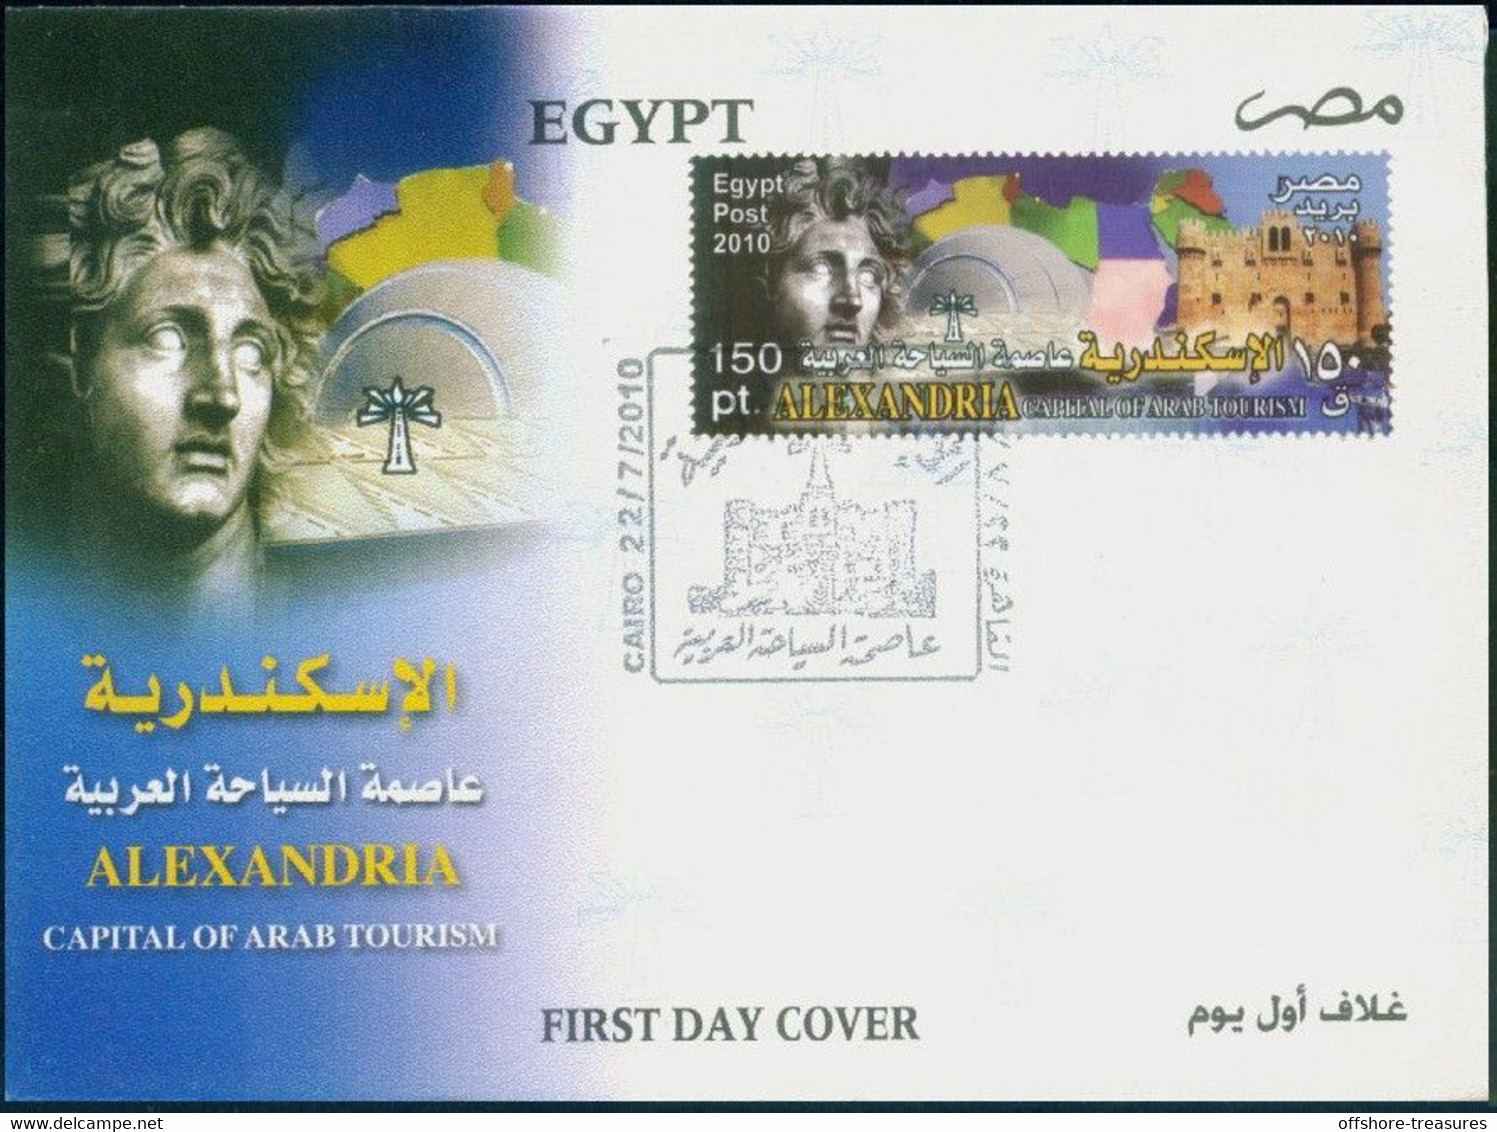 Egypt FDC 2010 ALEXANDRIA CAPITAL OF ARAB TOURISM FIRST DAY COVER - Covers & Documents